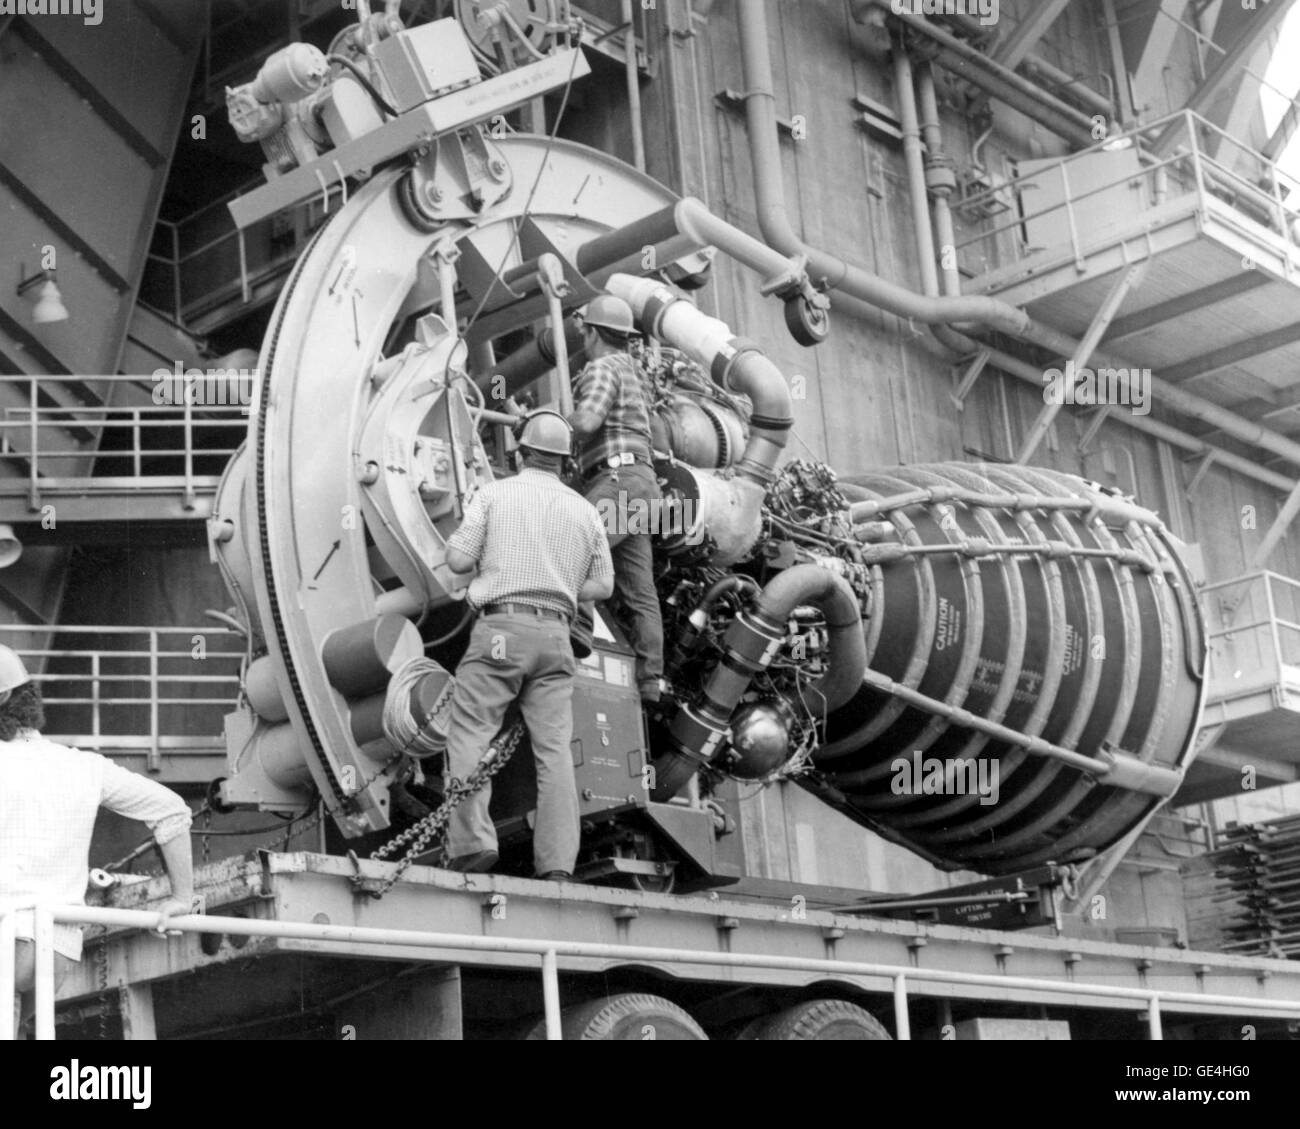 (1979) A Space Shuttle Main Engine (SSME) is hoisted into the A-2 Test Stand at the John C. Stennis Space Center before undergoing a test firing. Stock Photo